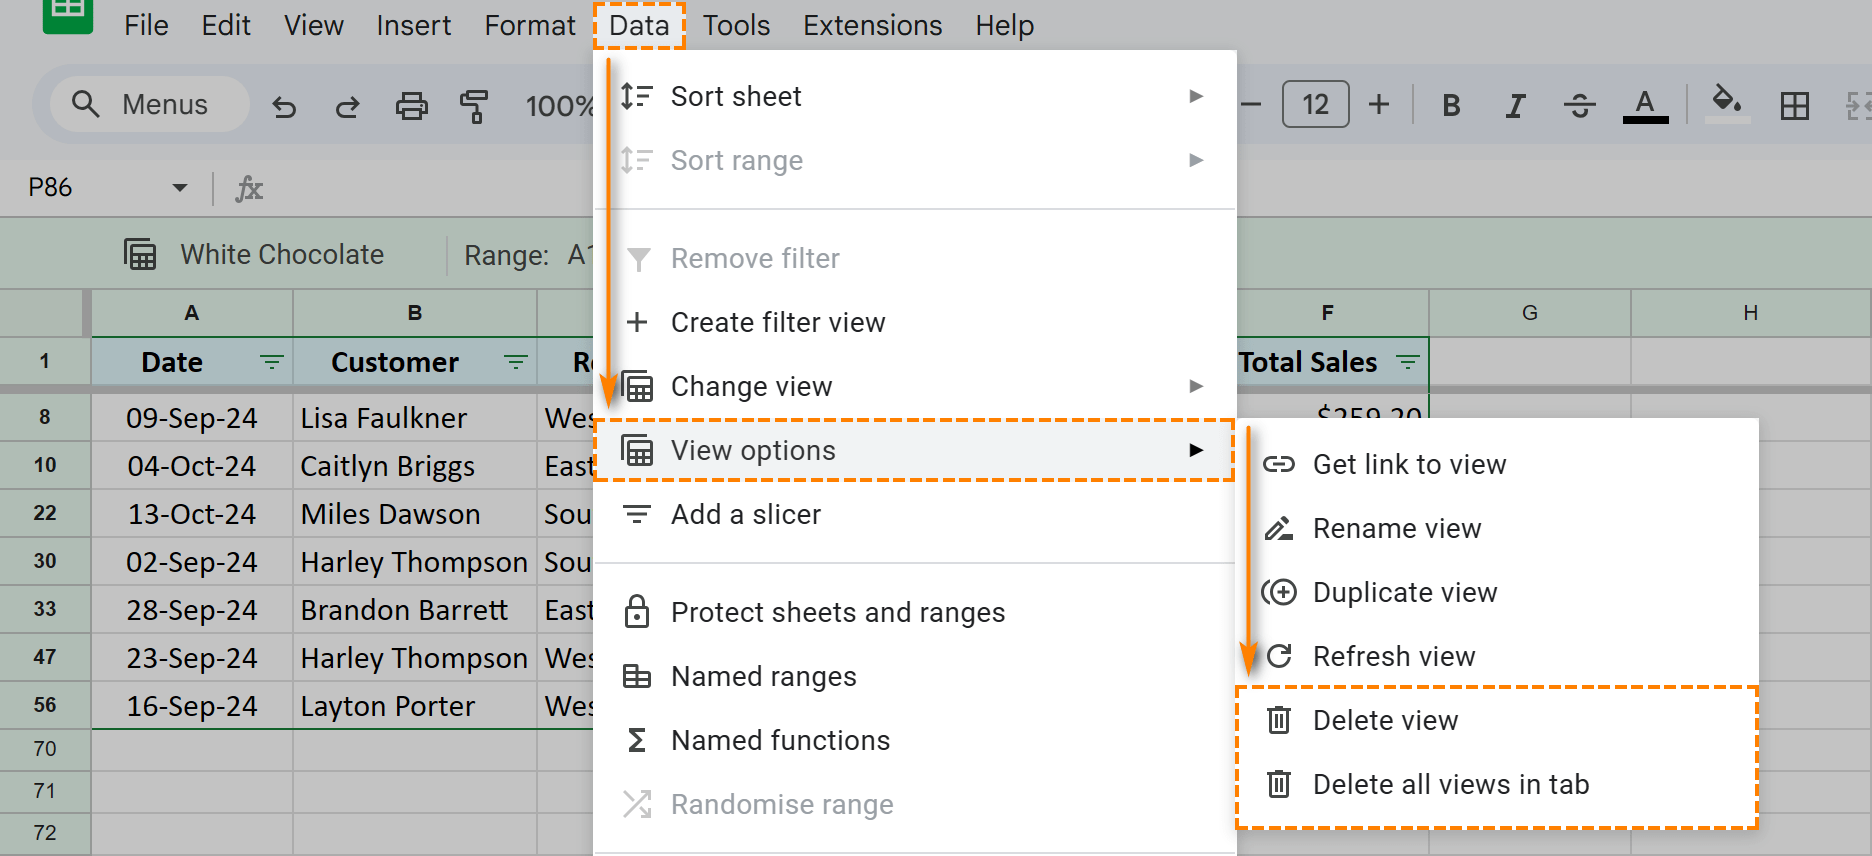 Options to delete the active or all views reside under the Data tab.